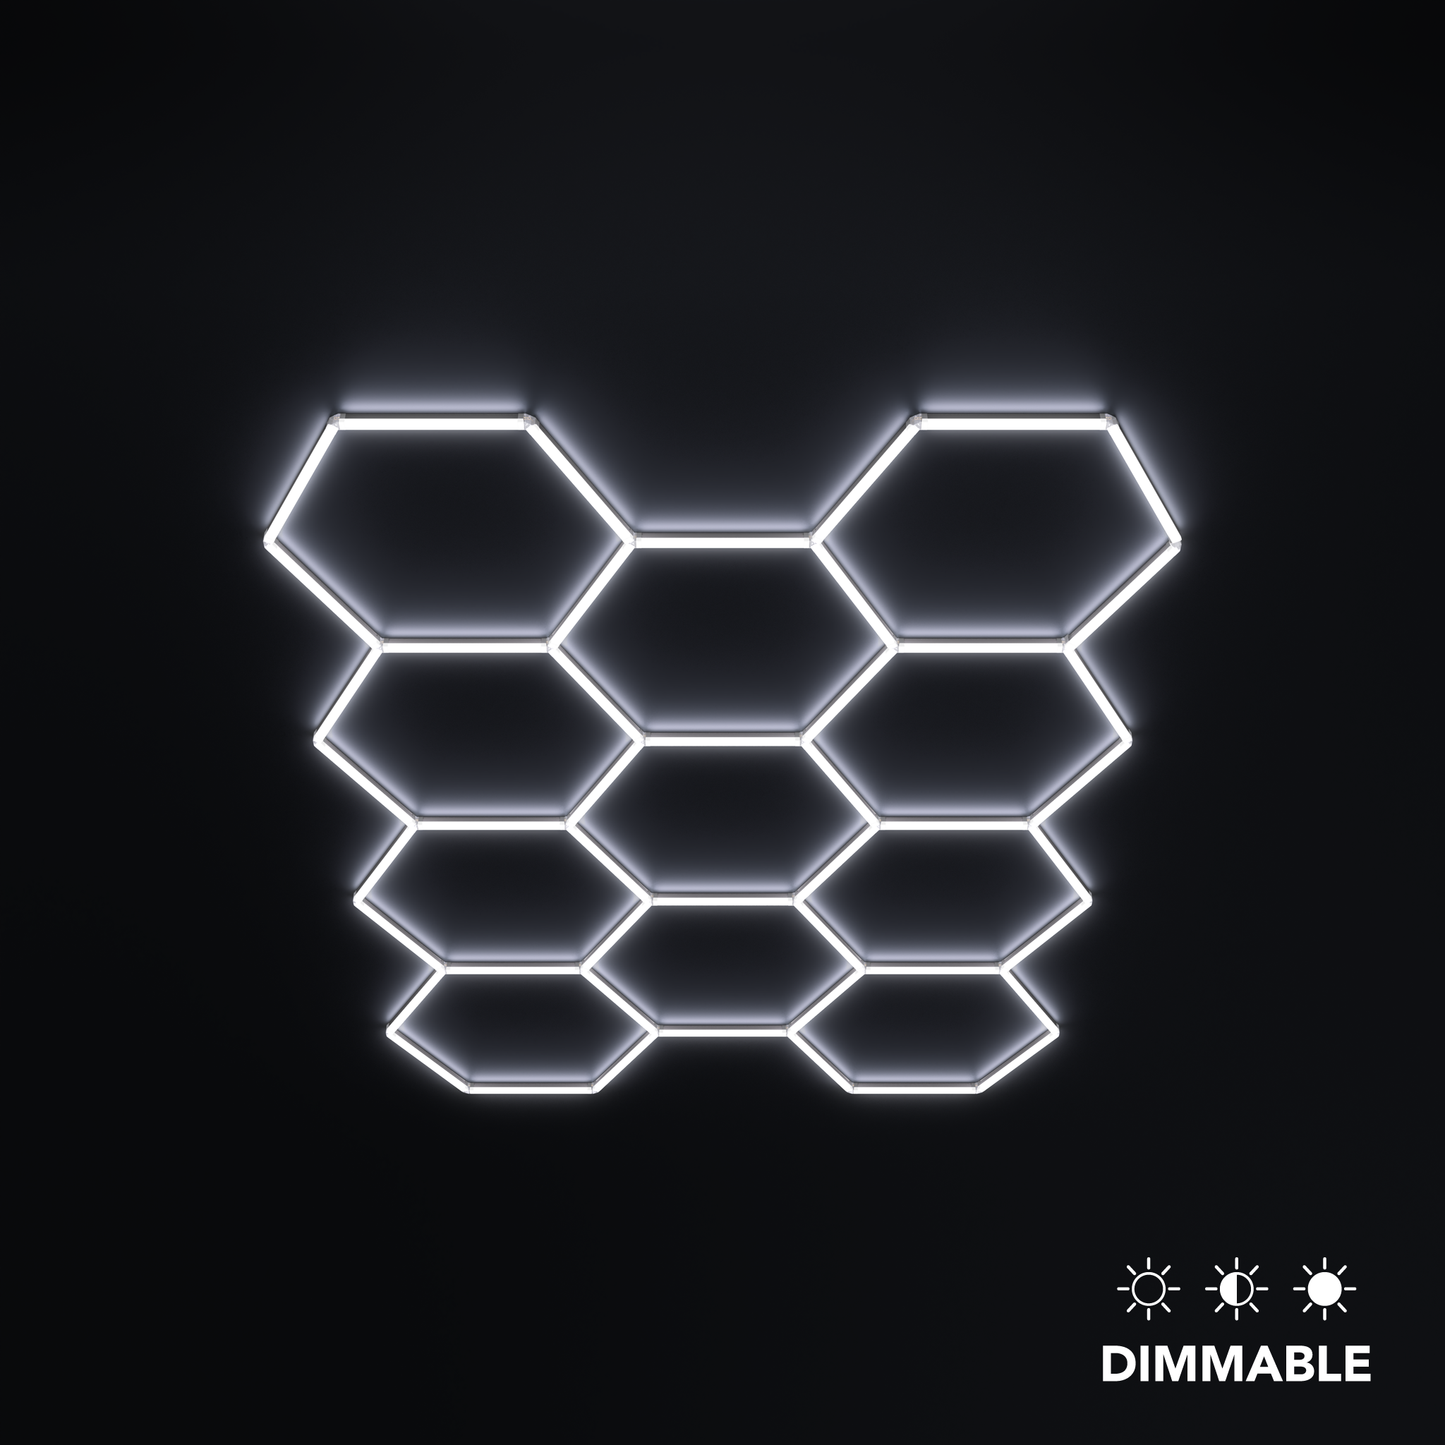 Dimmable 11 Hex Kit (11’ x 8’)